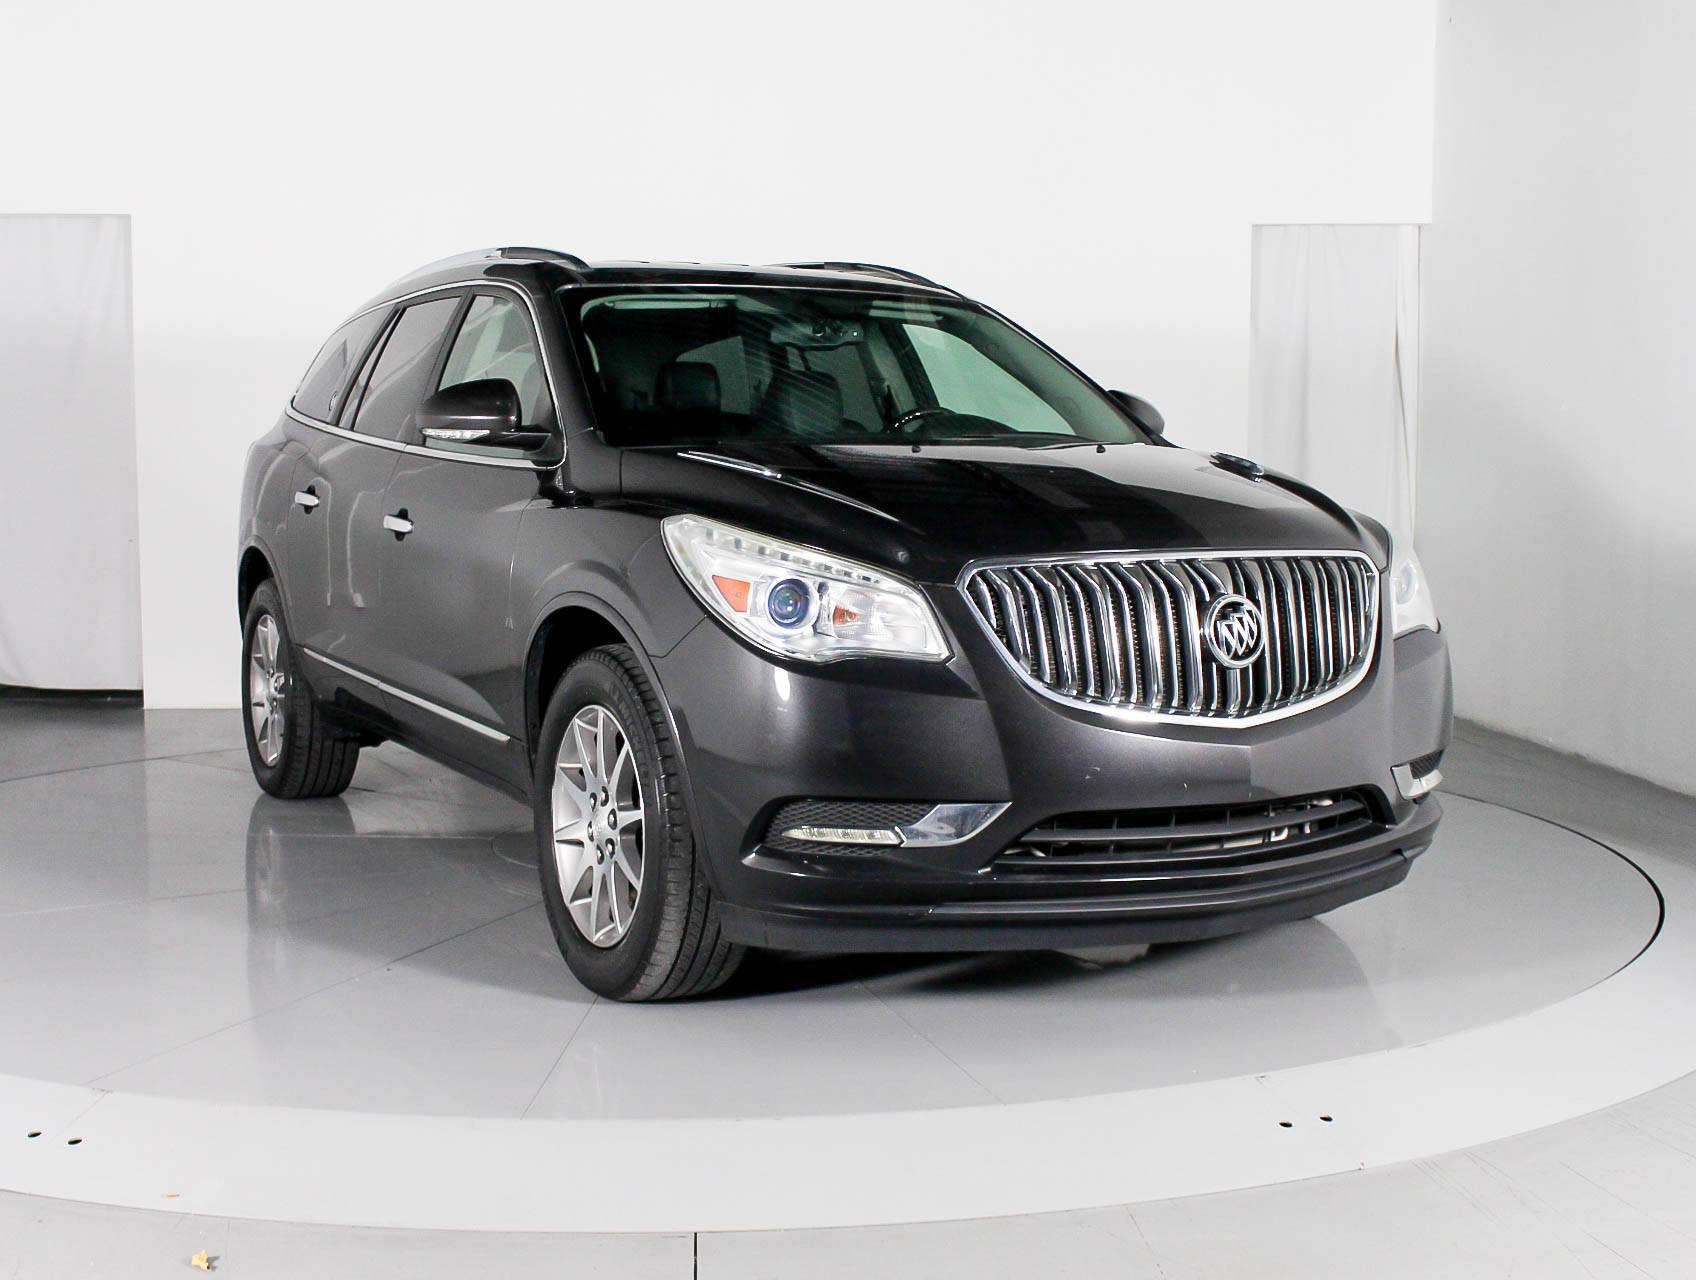 Florida Fine Cars - Used BUICK ENCLAVE 2015 MARGATE LEATHER